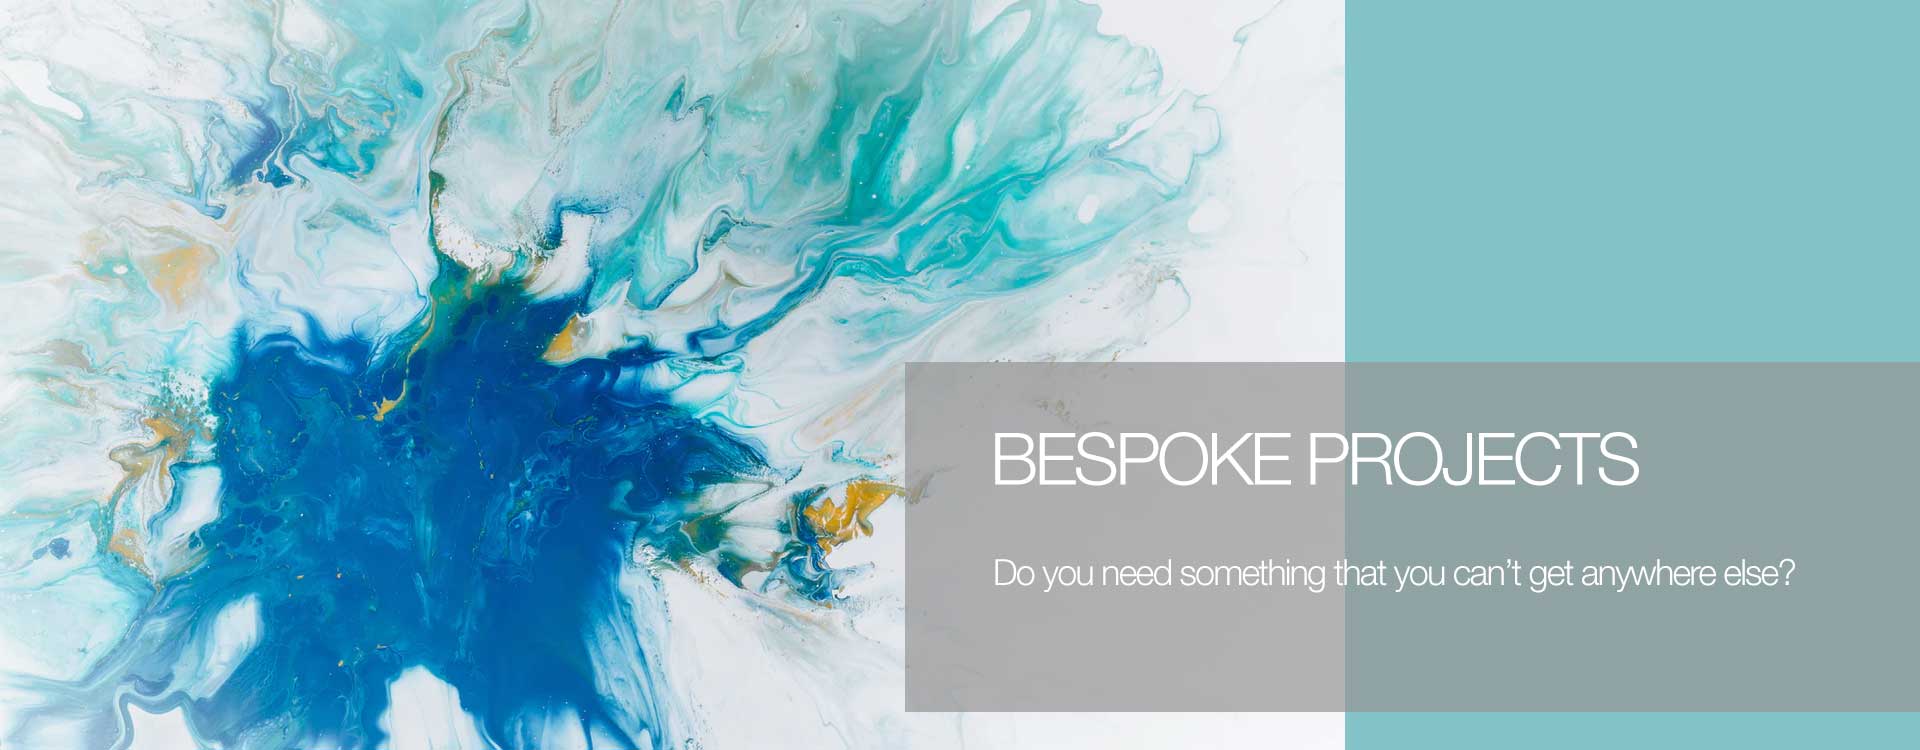 An abstract image that looks like splash of blue, green and yellow paint on a white canvas to represent bespoke projects